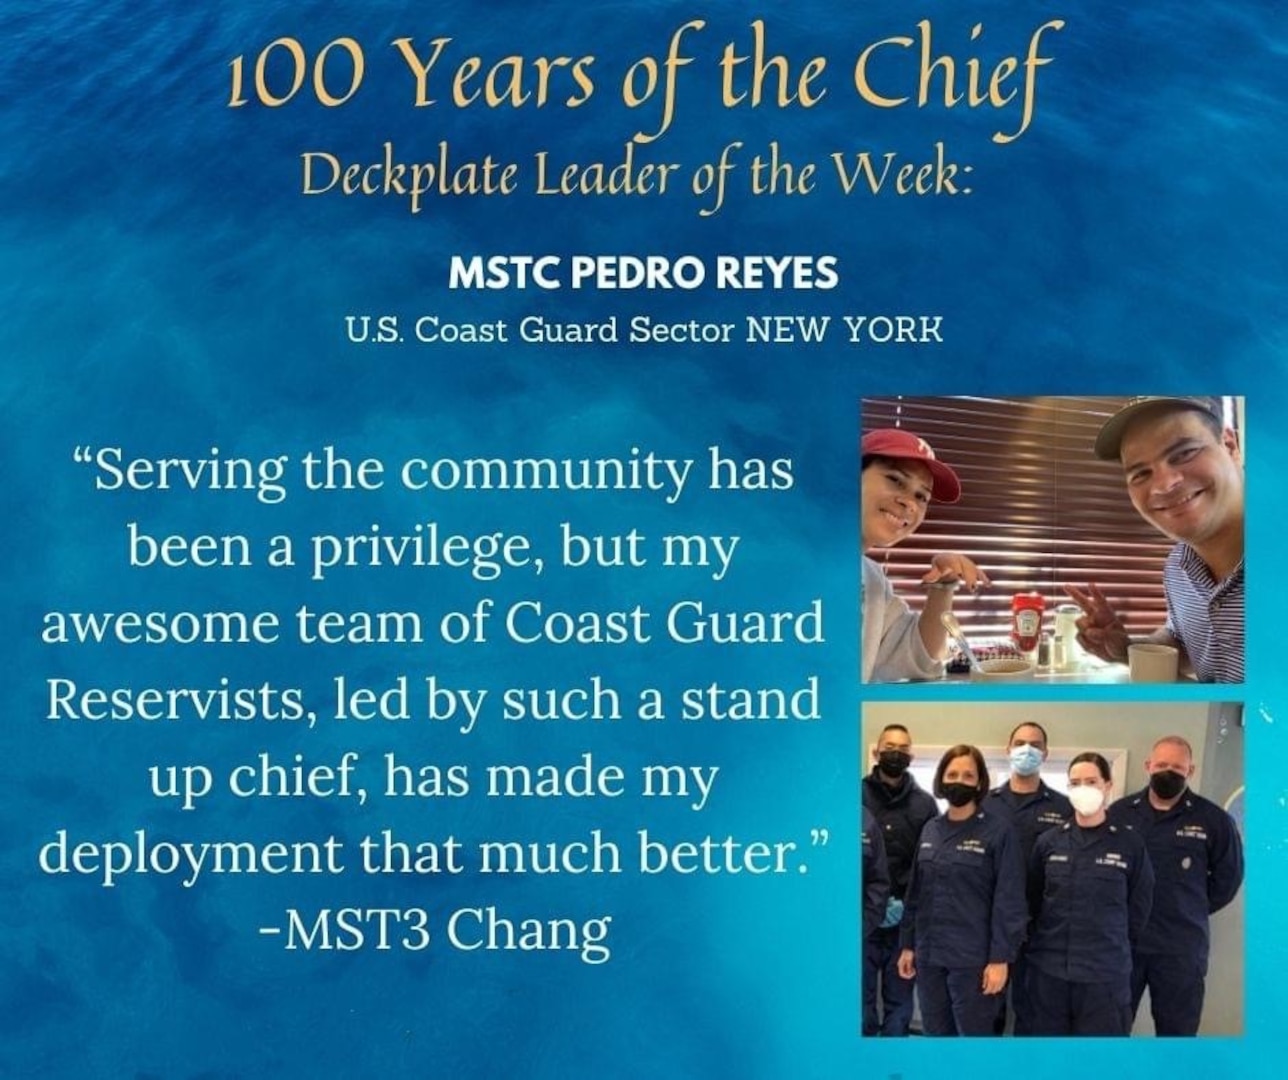 Our Leader of the Week nomination comes from Petty Officer 3rd Class Joe Chang, a marine science technician based out of U.S. Coast Guard New York currently on Title 10 Orders in Brooklyn, New York as part of the Covid-19 Vaccination roll out. Chang reached out to nominate his team leader, Chief Petty Officer Pedro Reyes, also a marine science technician!